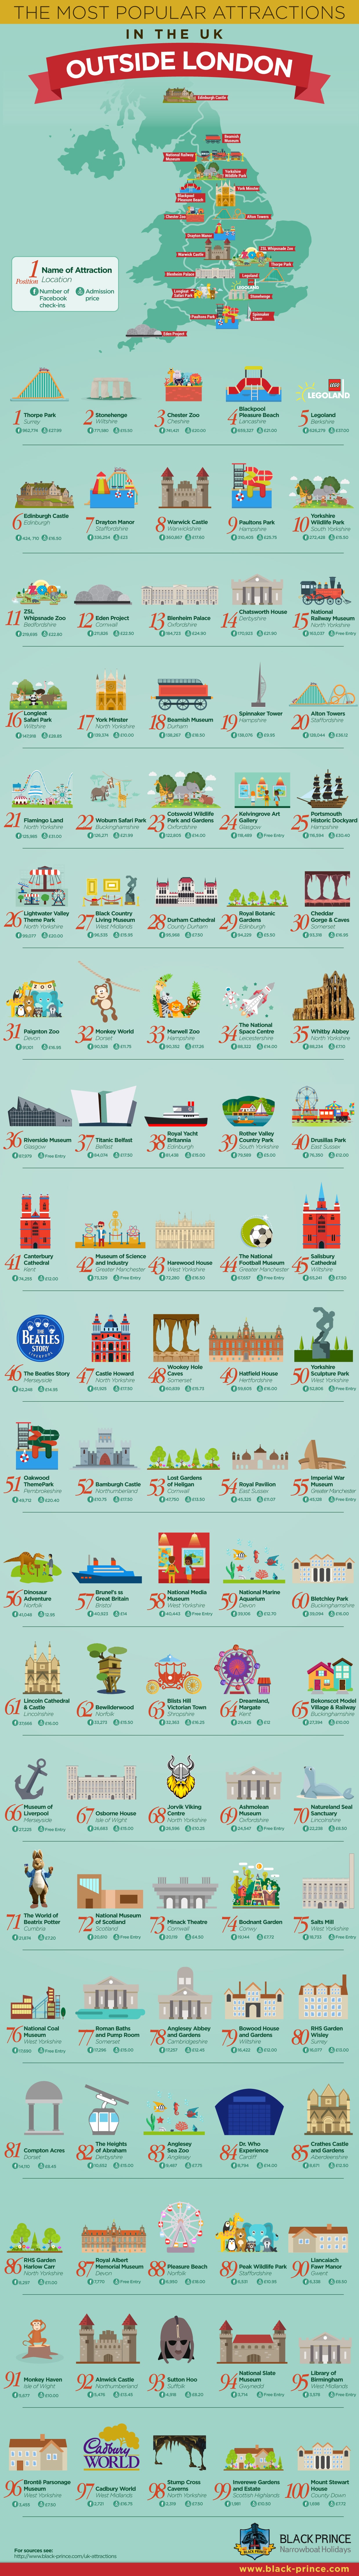 Most Popular Attractions Outside of London